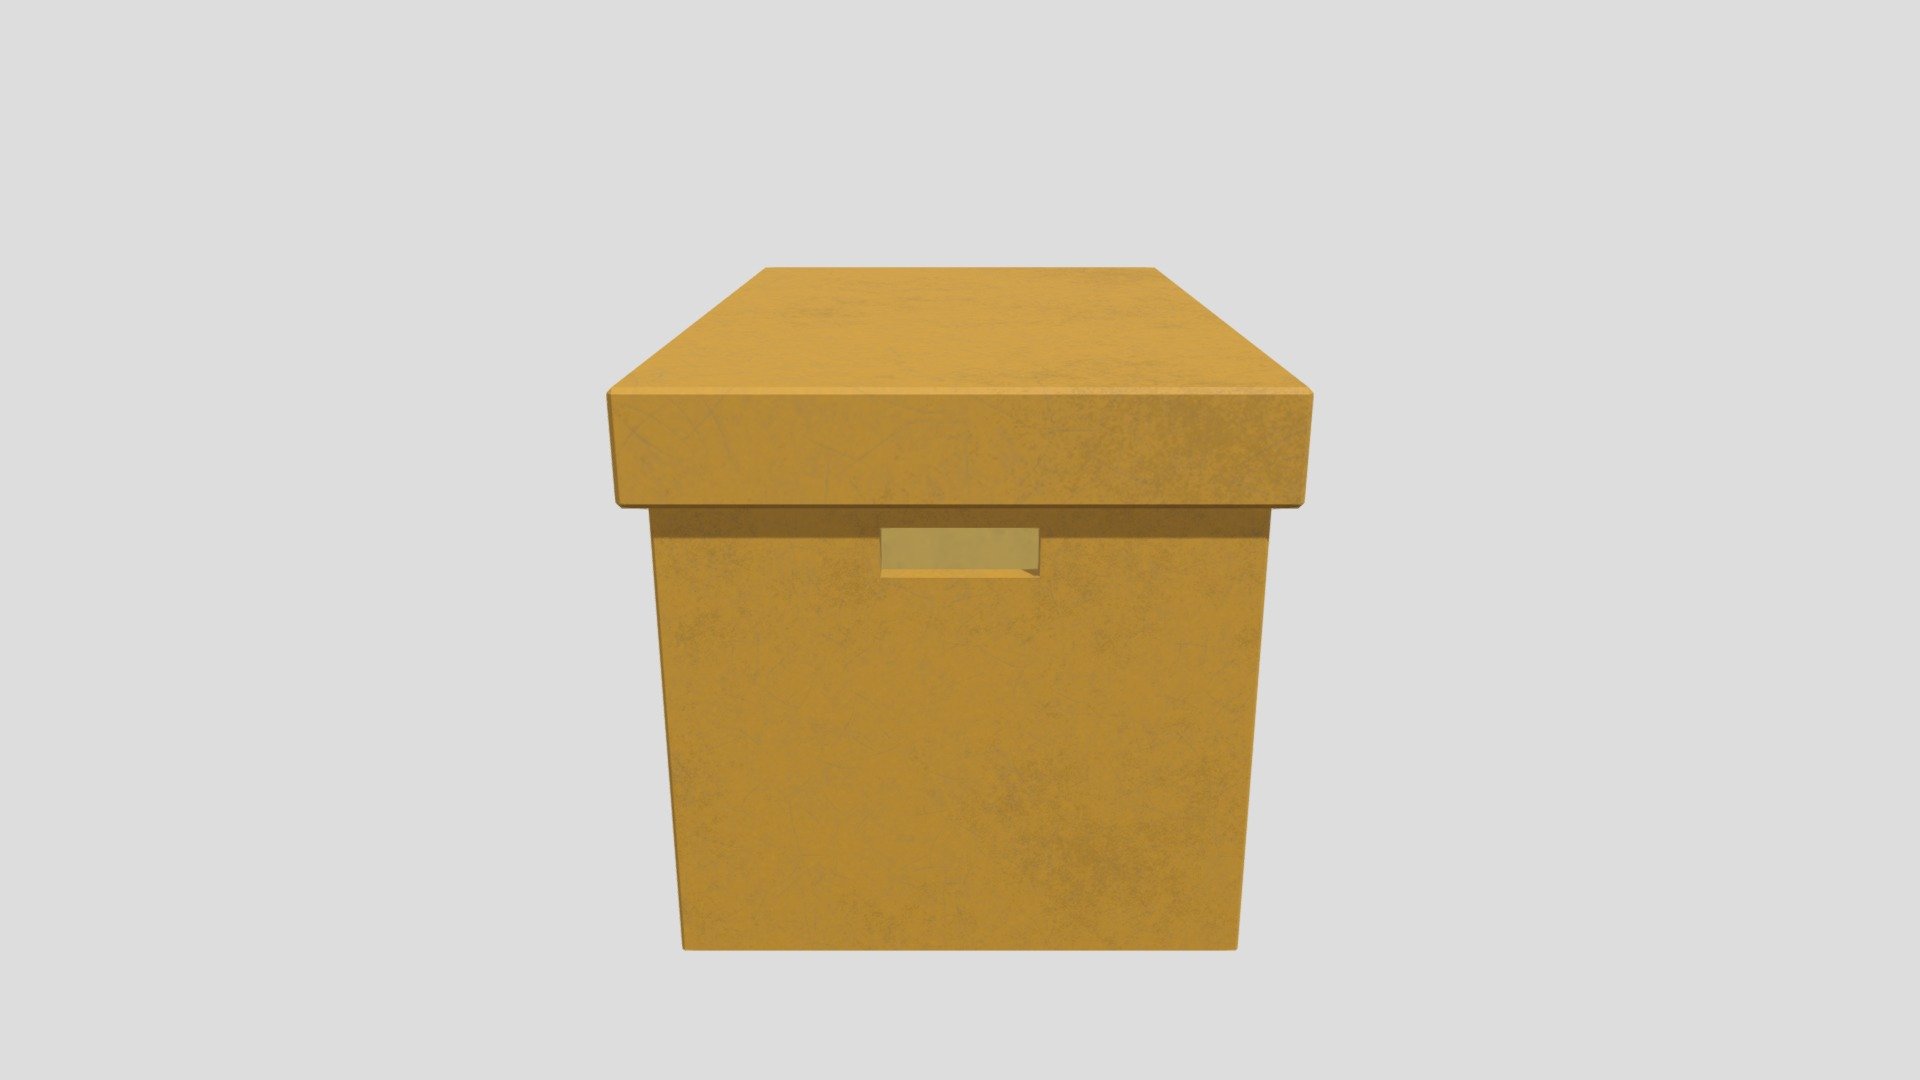 Filing Box created and textured by me, used in the final project game The Erebus Incident 3d model